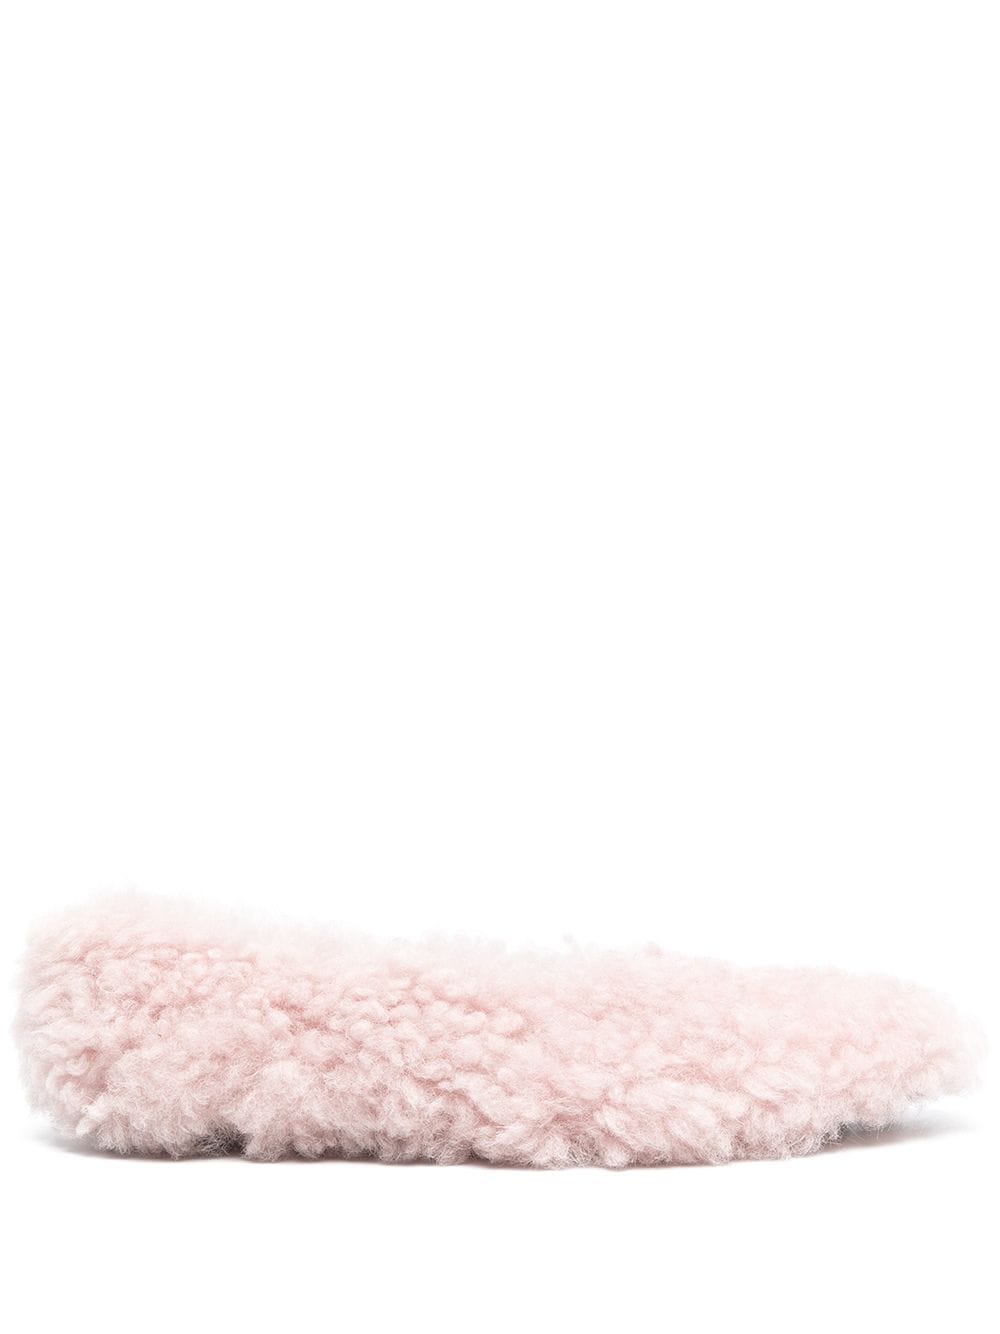 Buy Marni Ballerina In Pink Sheep Wool online, shop Marni shoes with free shipping